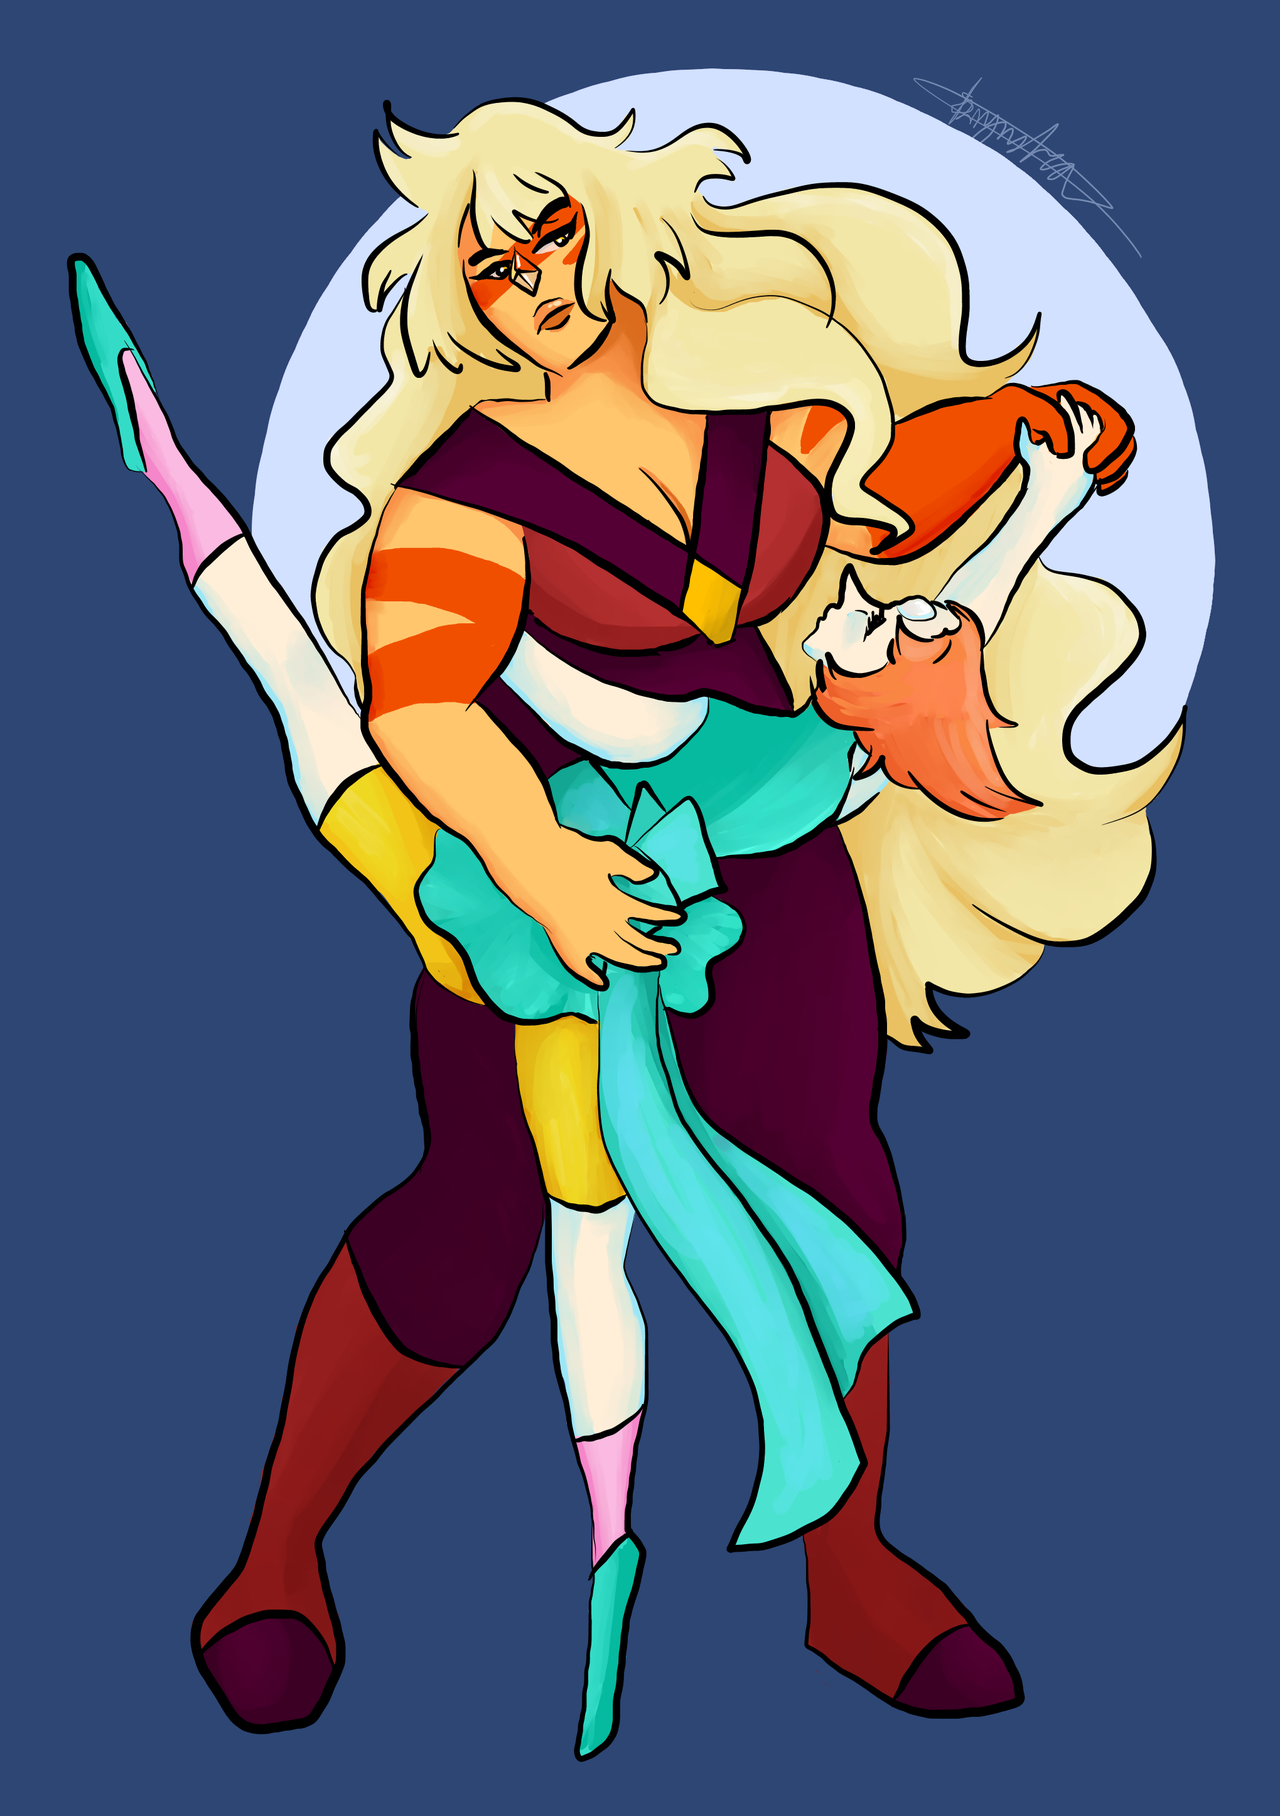 Jaspearl | Dance or fuse lmao I wish this ship would sail!